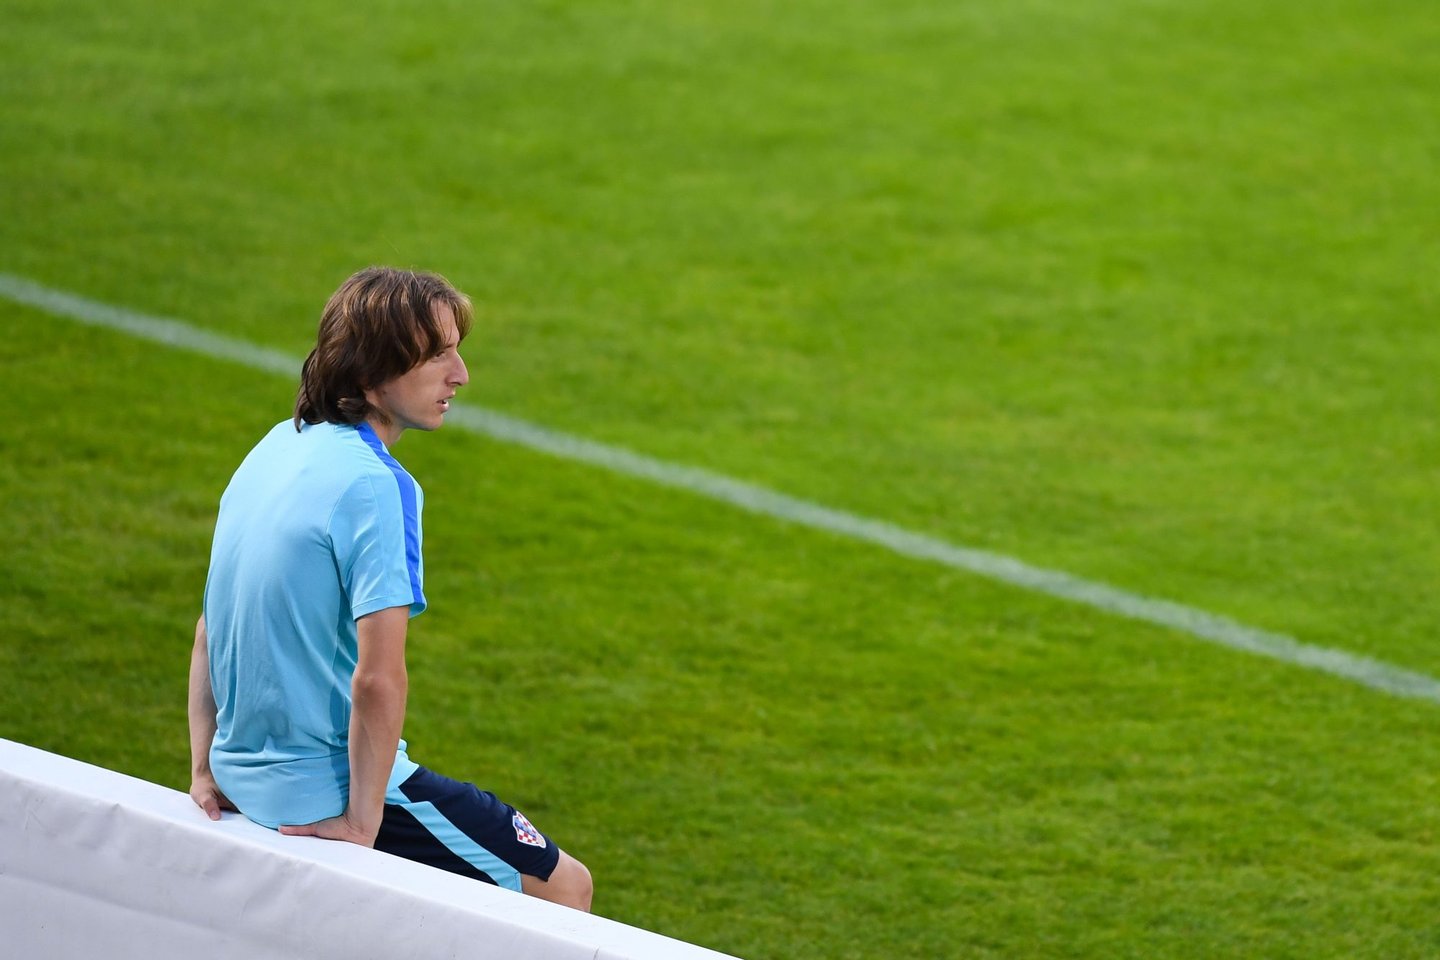 BORDEAUX, FRANCE - JUNE 20:  Luka Modric of Croatia looks on during a training session ahead of their UEFA  Euro 2016 Group D match against Spain at Stade Chaban-Delmas on June 20, 2016 in Bordeaux, France.  (Photo by David Ramos/Getty Images)